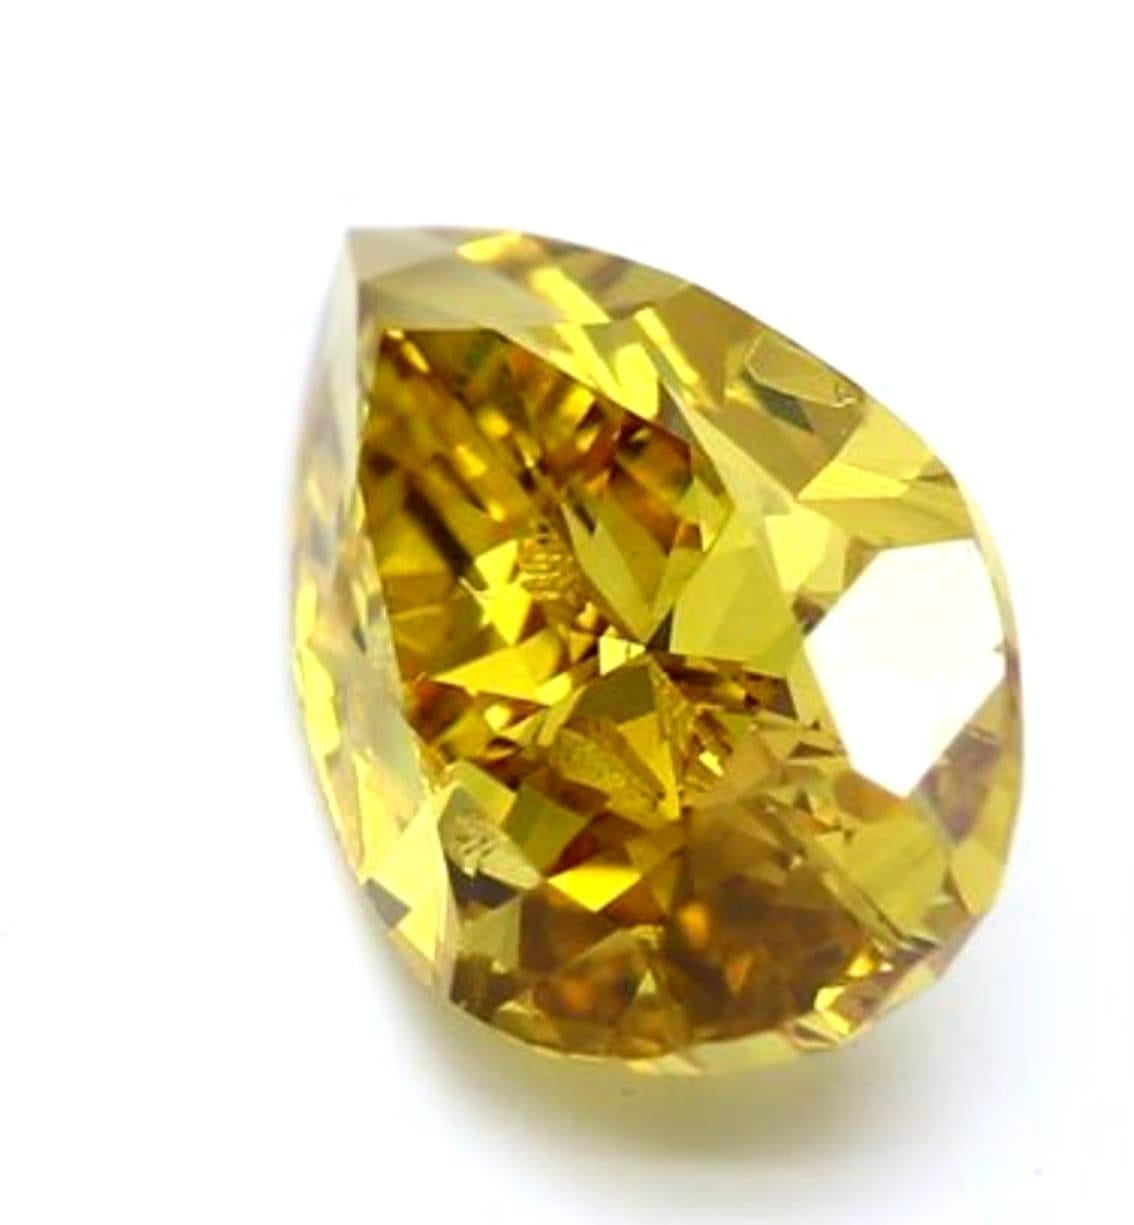 *100% NATURAL FANCY COLOUR DIAMOND*

✪ Diamond Details ✪

➛ Shape: Pear
➛ Colour Grade: Fancy Deep Yellow
➛ Carat: 1.01
➛ GIA Certified 

^FEATURES OF THE DIAMOND^

Our fancy deep yellow diamond is a rare and exquisite gemstone with a rich, intense